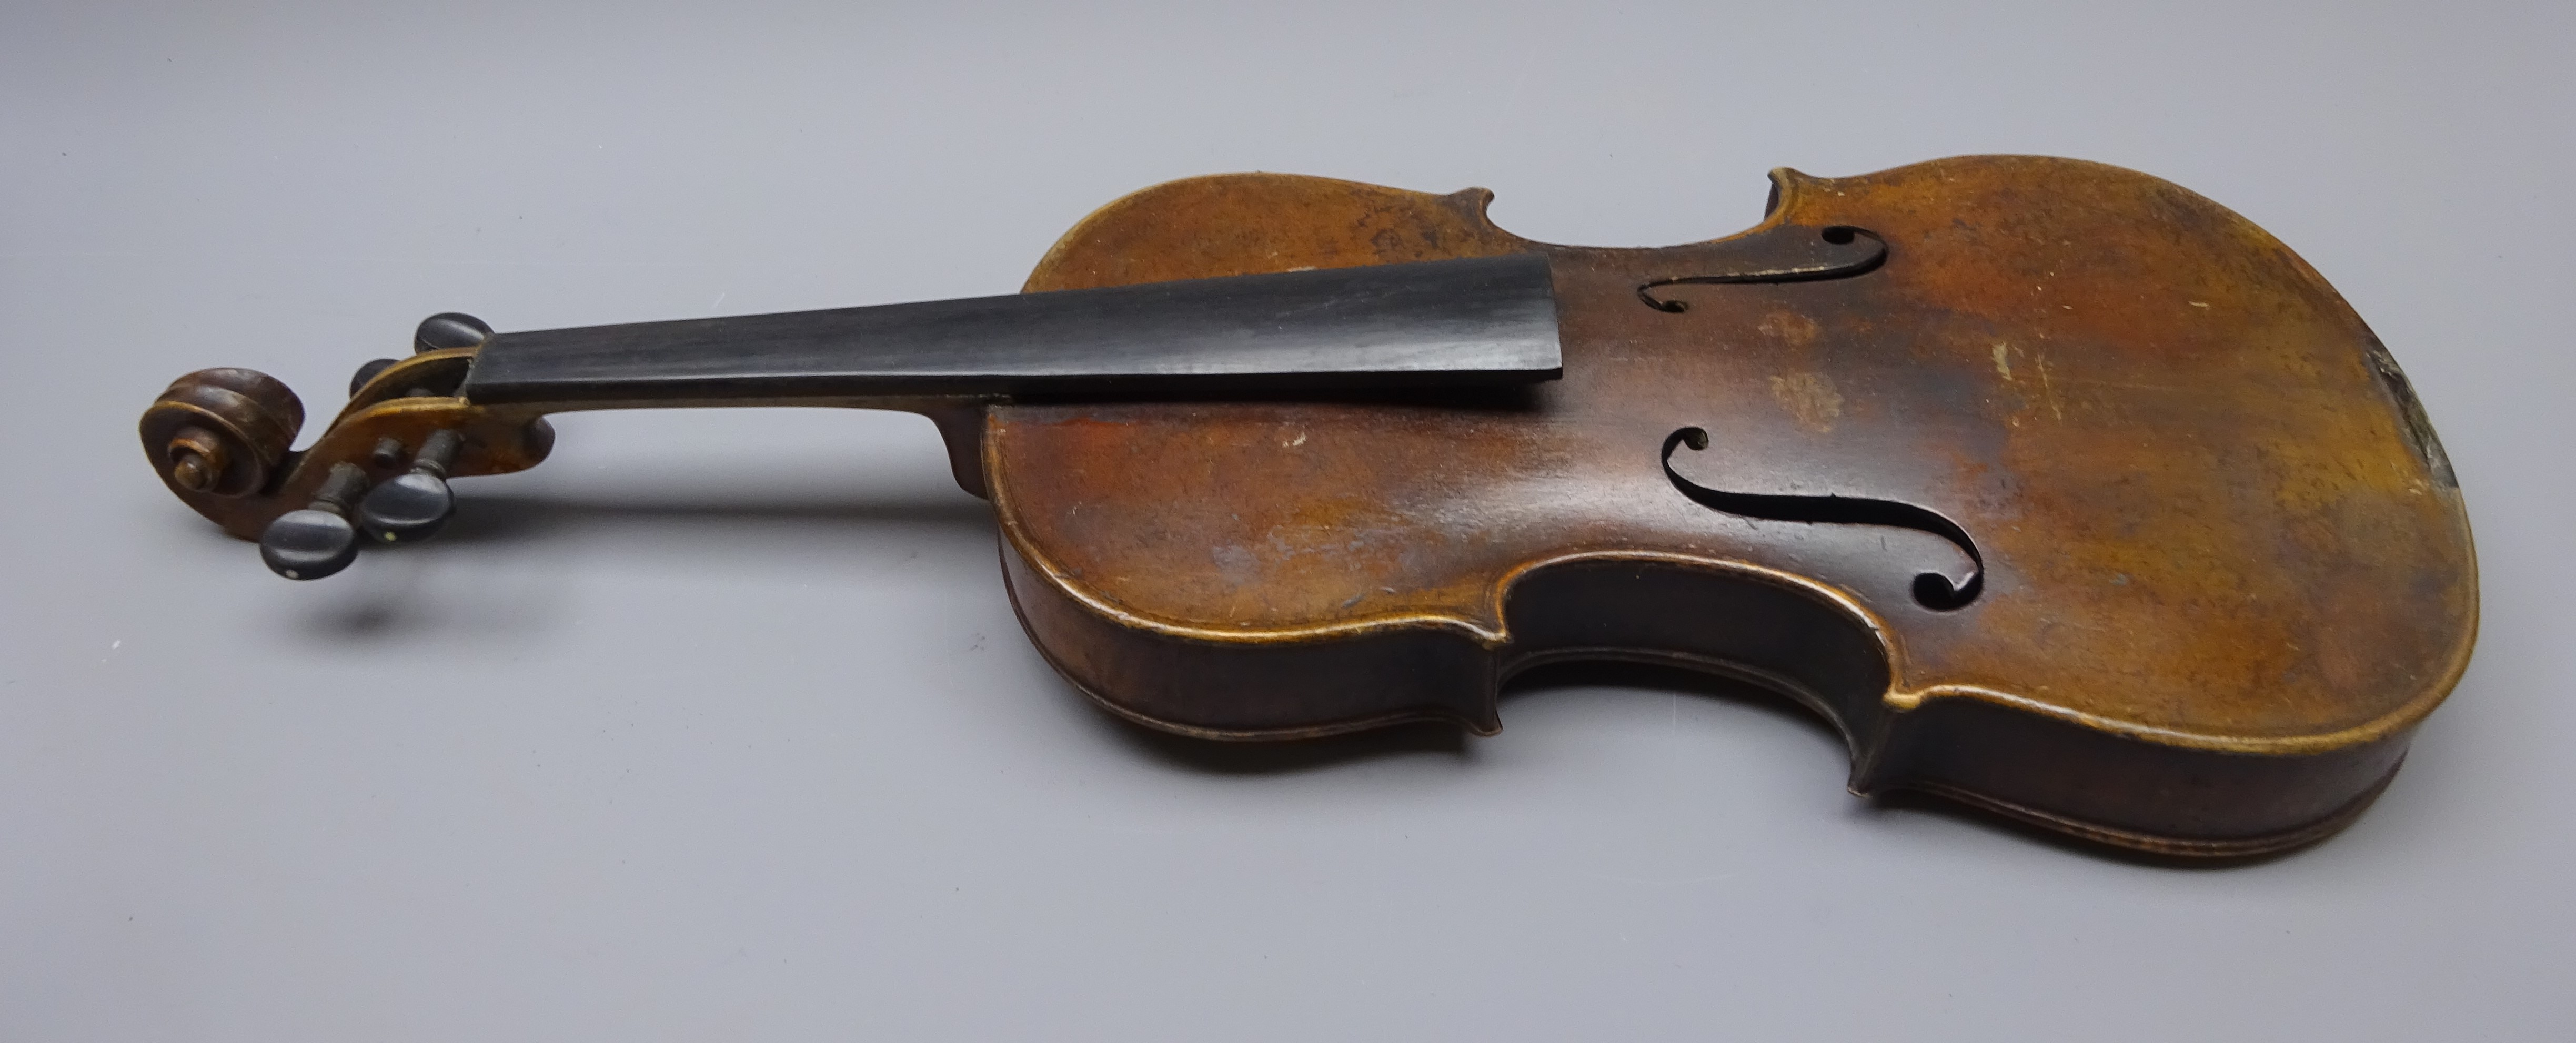 Late 19th century German violin with 36cm two-piece maple back and ribs and spruce top, - Image 3 of 8